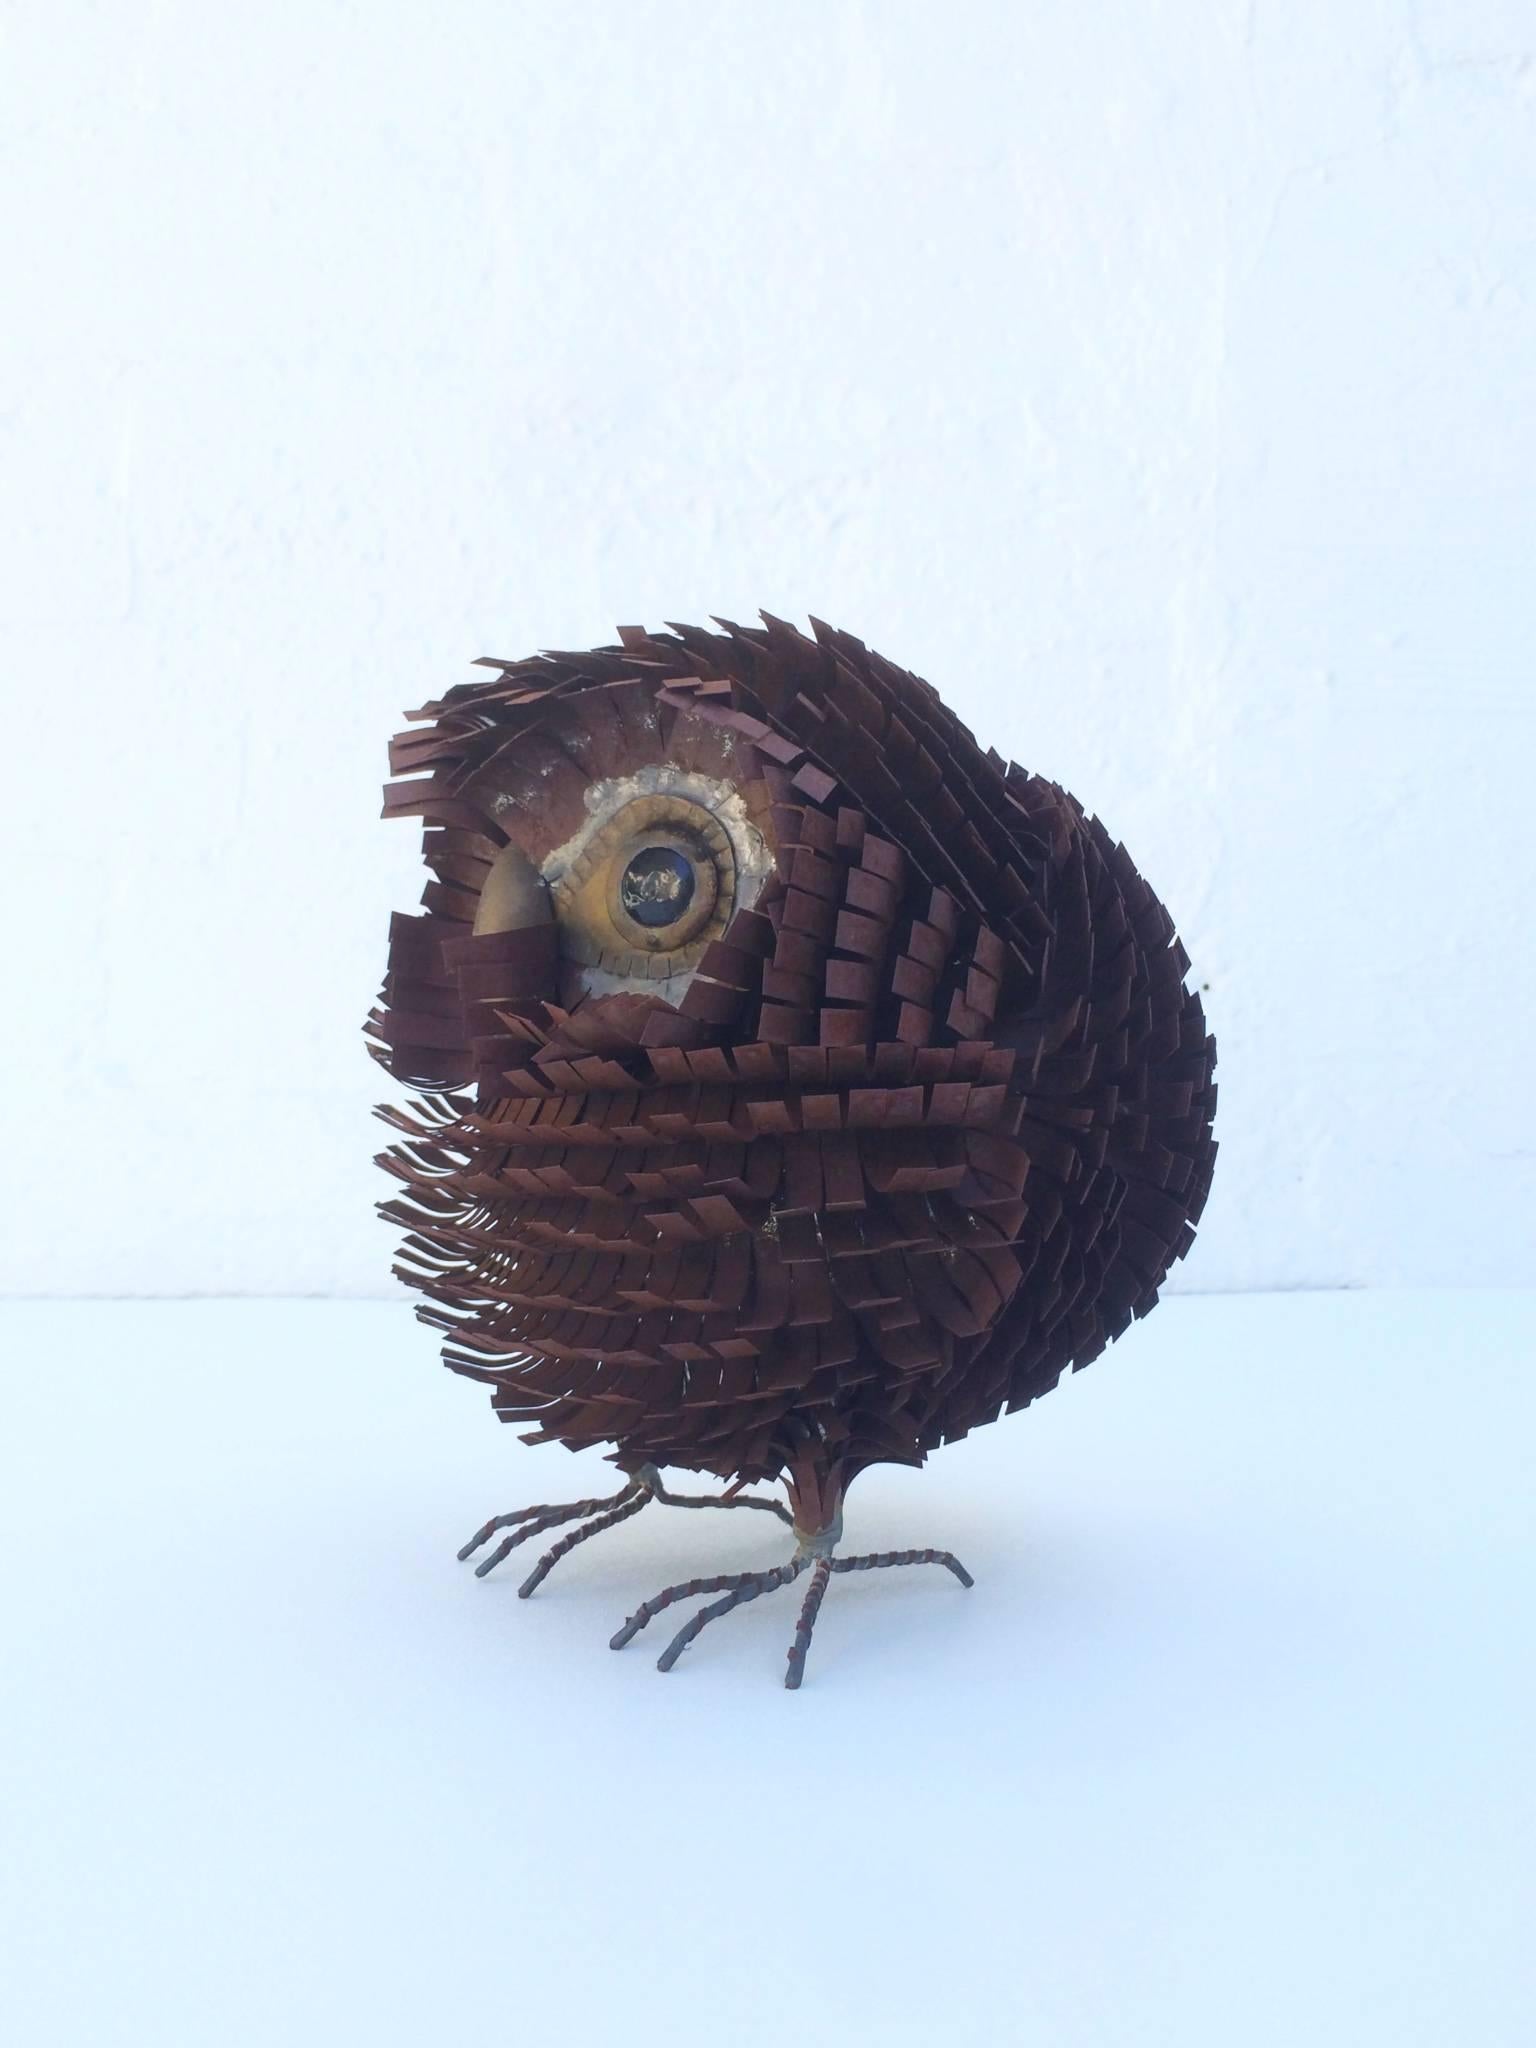 A whimsical owl sculpture made of brass and metal by Curtis Jere, circa 1970s.
      